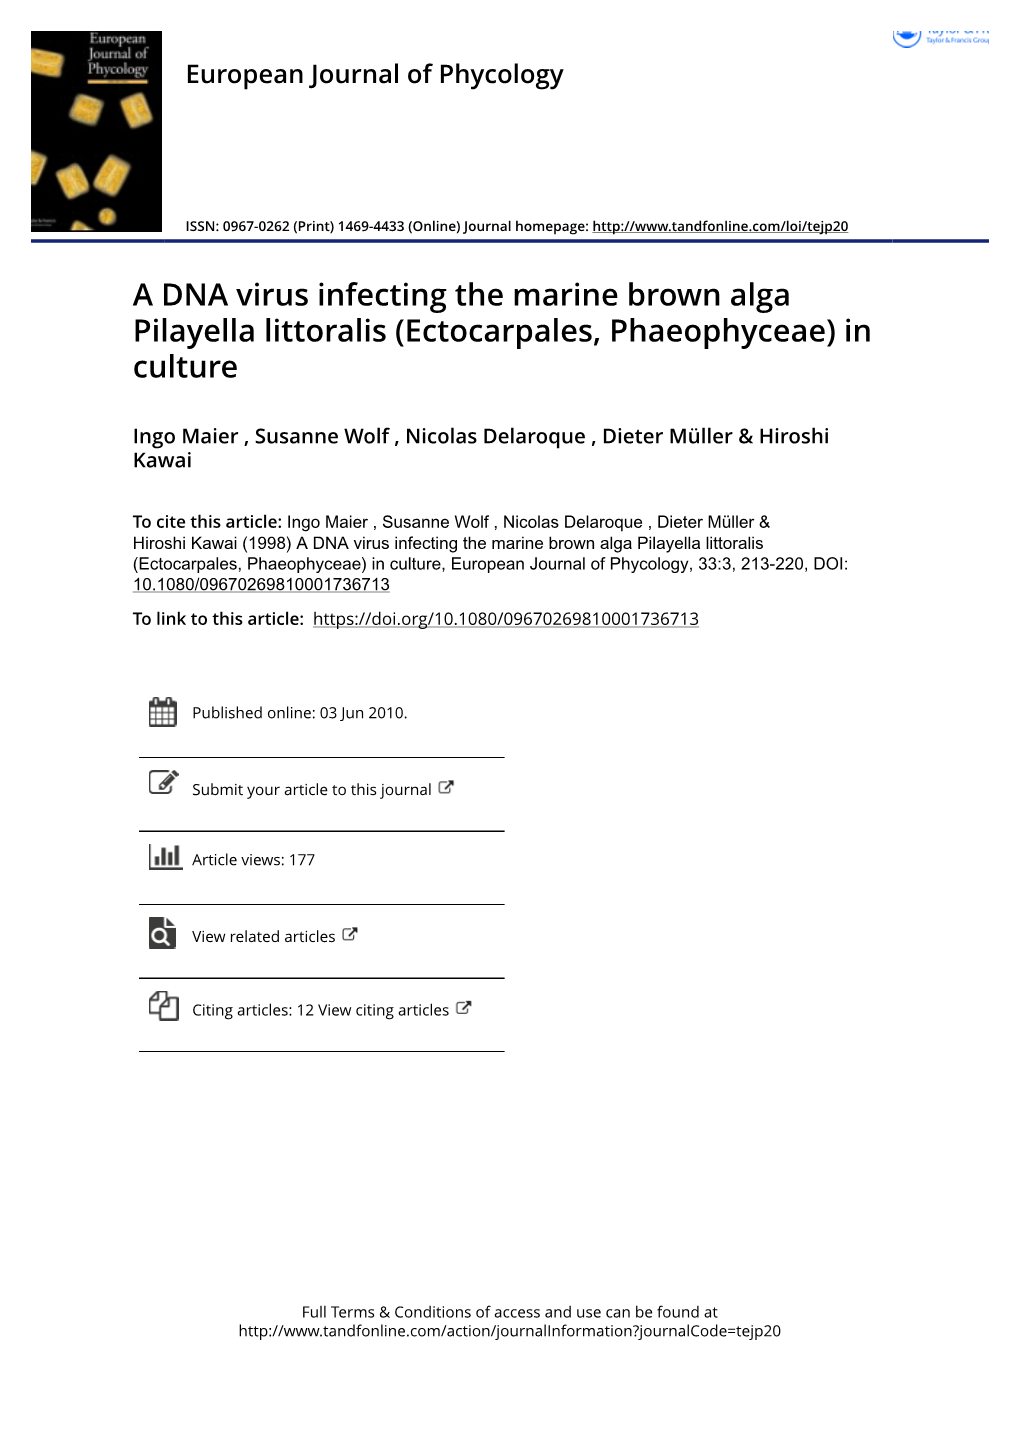 A DNA Virus Infecting the Marine Brown Alga Pilayella Littoralis (Ectocarpales, Phaeophyceae) in Culture